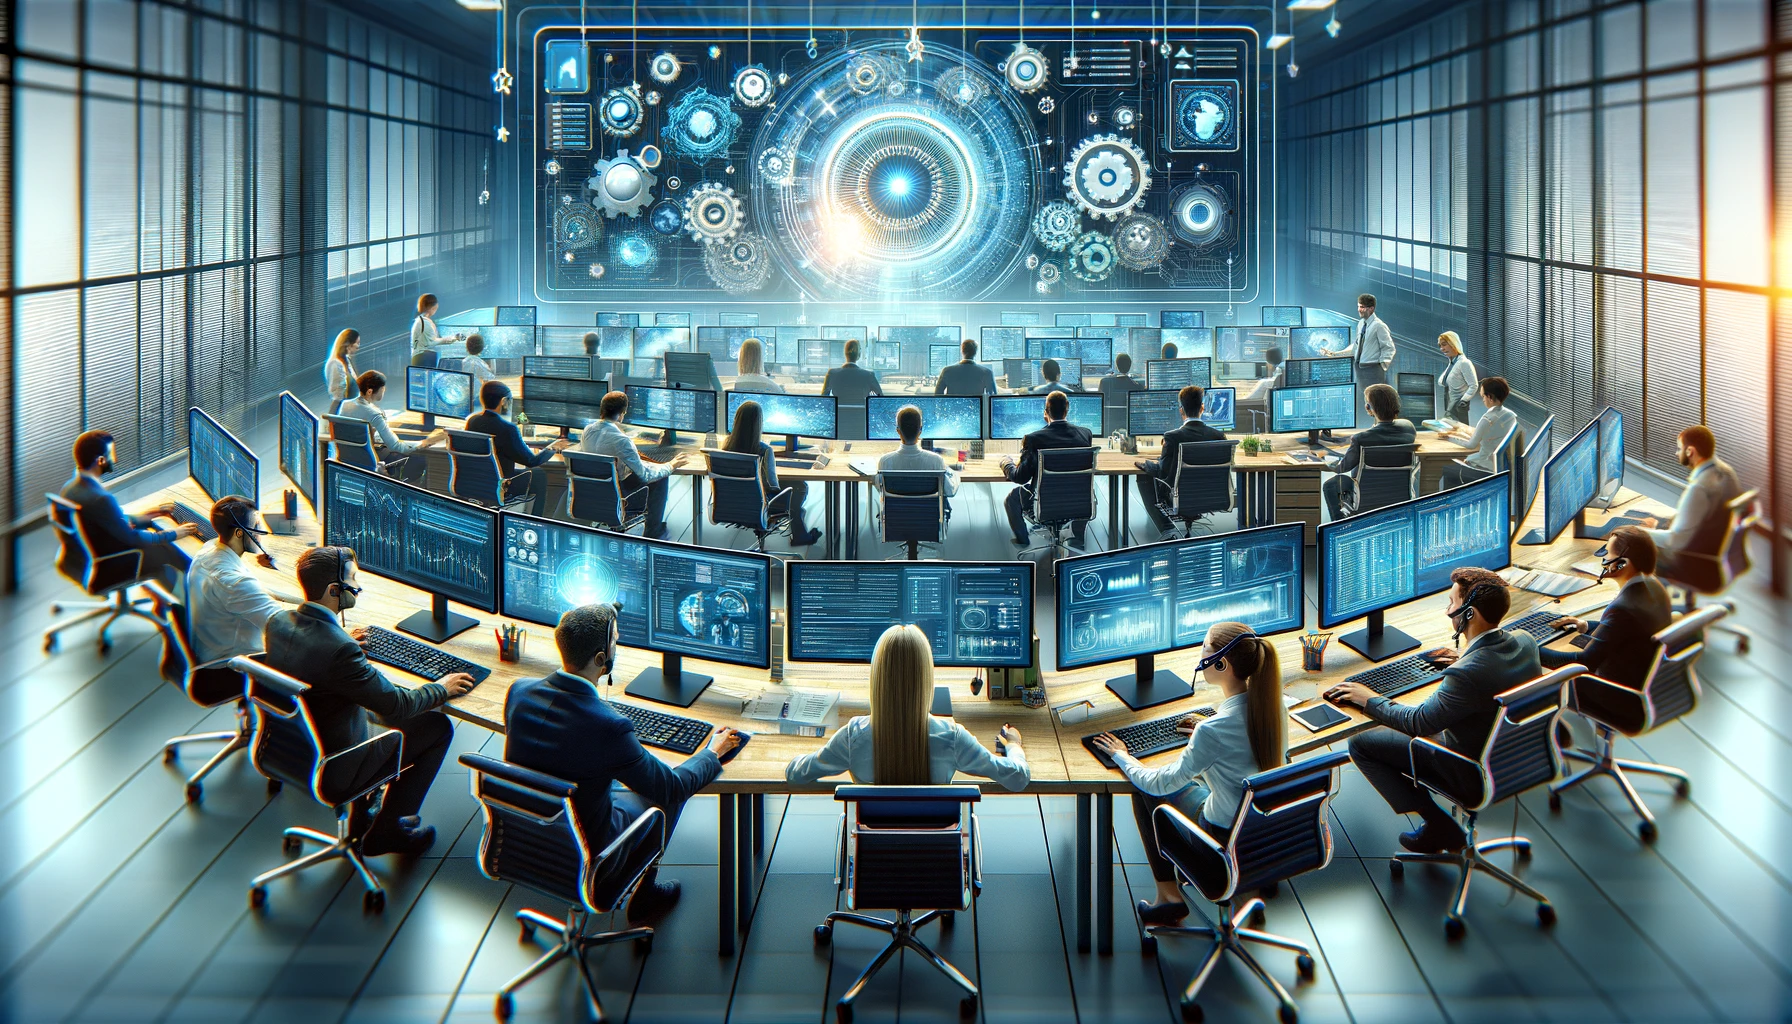 The image depicts a professional IT support team collaboratively working in a corporate environment, surrounded by computer monitors and engaged in various tasks to ensure the smooth operation of technological systems, embodying the essence of teamwork and expertise in IT support.